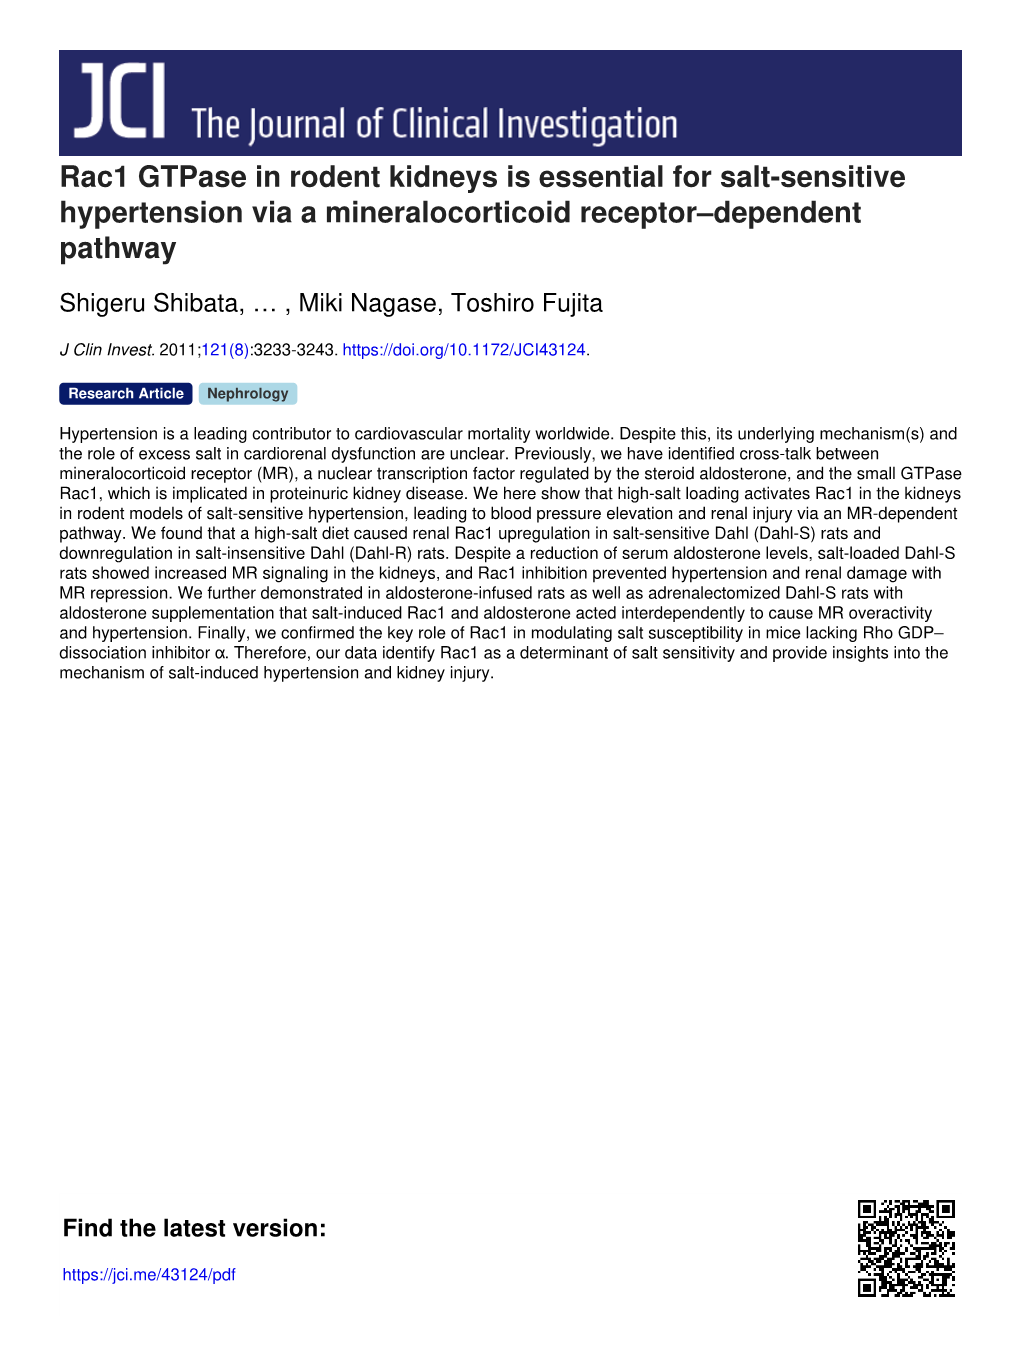 Rac1 Gtpase in Rodent Kidneys Is Essential for Salt-Sensitive Hypertension Via a Mineralocorticoid Receptor–Dependent Pathway